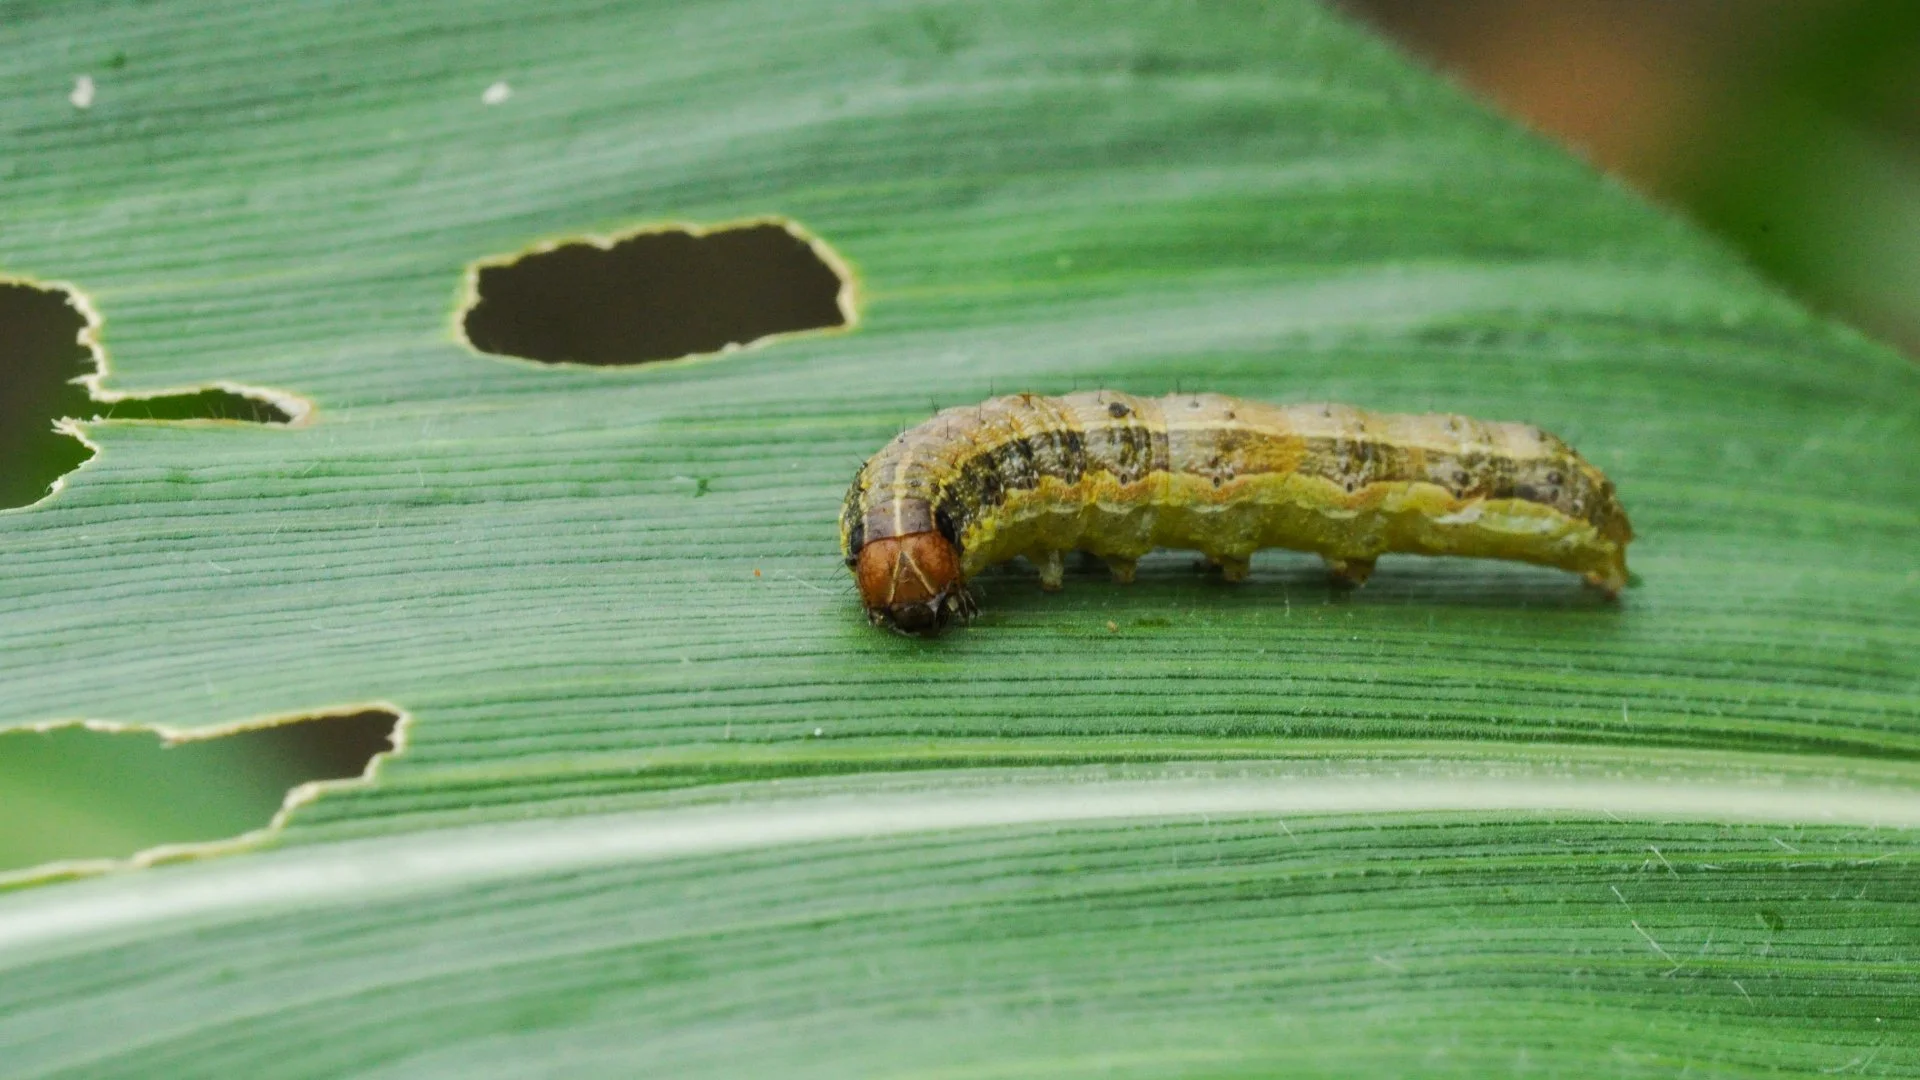 Does Your Lawn Have Armyworm Damage? Here’s How To Tell & What To Do